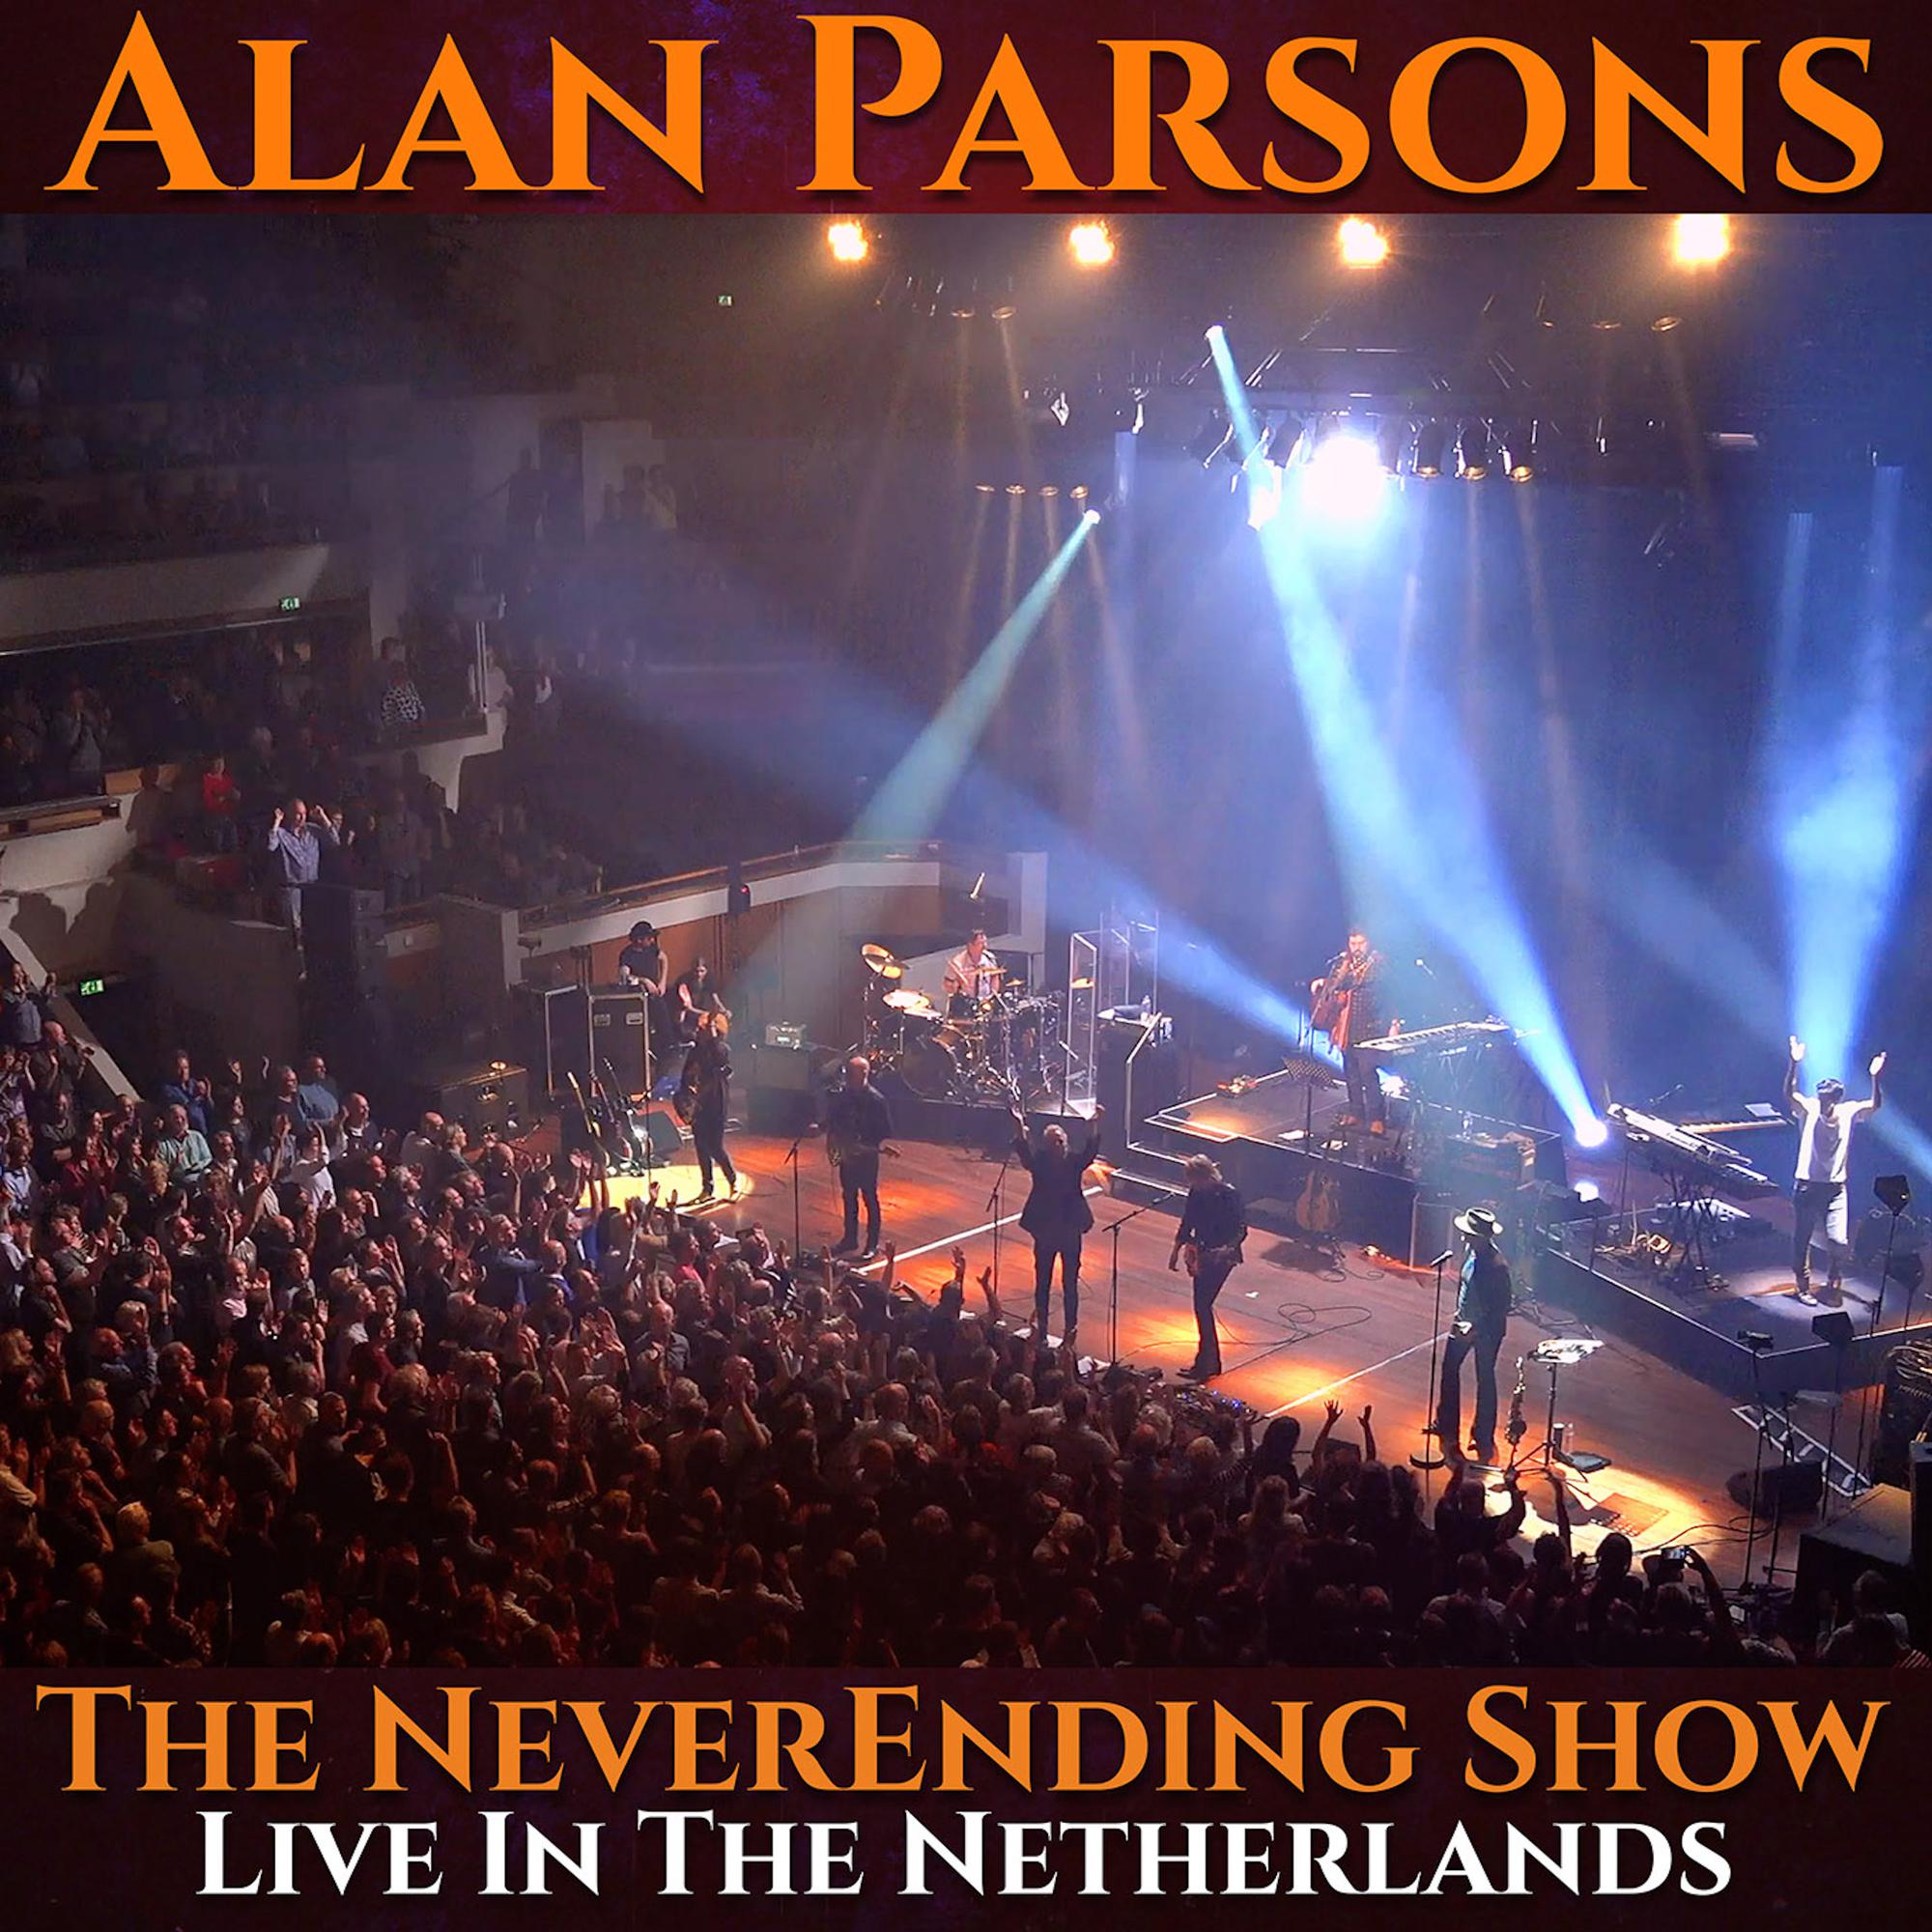 ALAN PARSONS 'THE NEVERENDING SHOW: LIVE IN THE NETHERLANDS' 3LP (Limited Edition Crystal Vinyl)